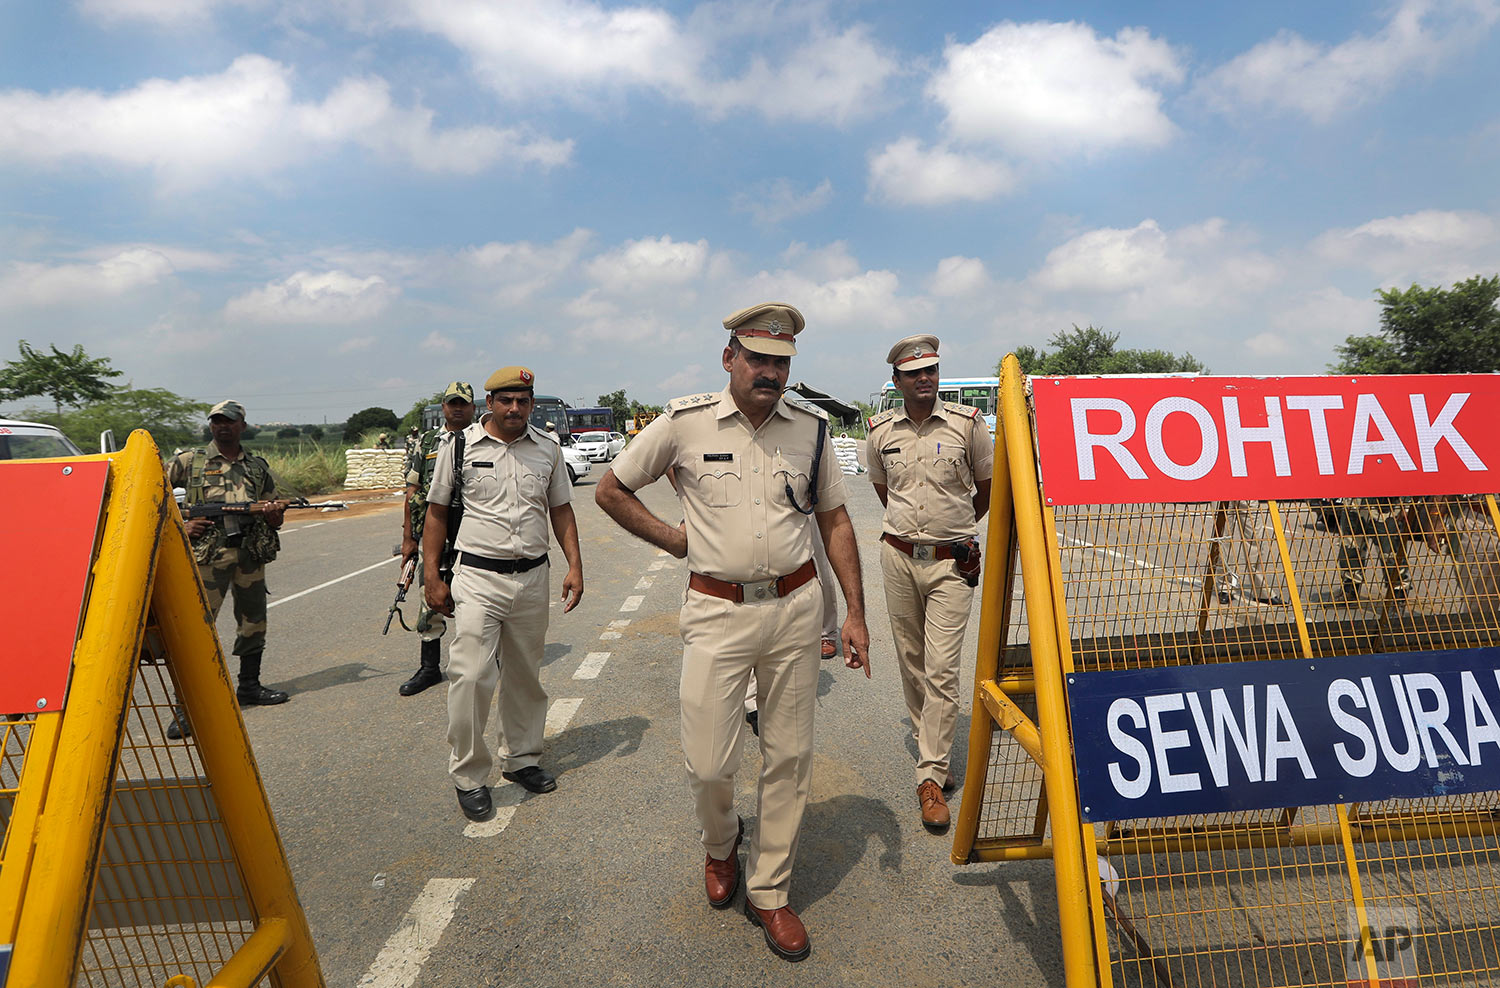  Indian policemen stand guard at a temporary road blockade near Sunaria Jail where Dera Sacha Sauda sect chief Gurmeet Ram Rahim Singh is being held in Rohtak, about 80 kilometers (50 miles) from New Delhi, India, Monday, August 28, 2017. A curfew is